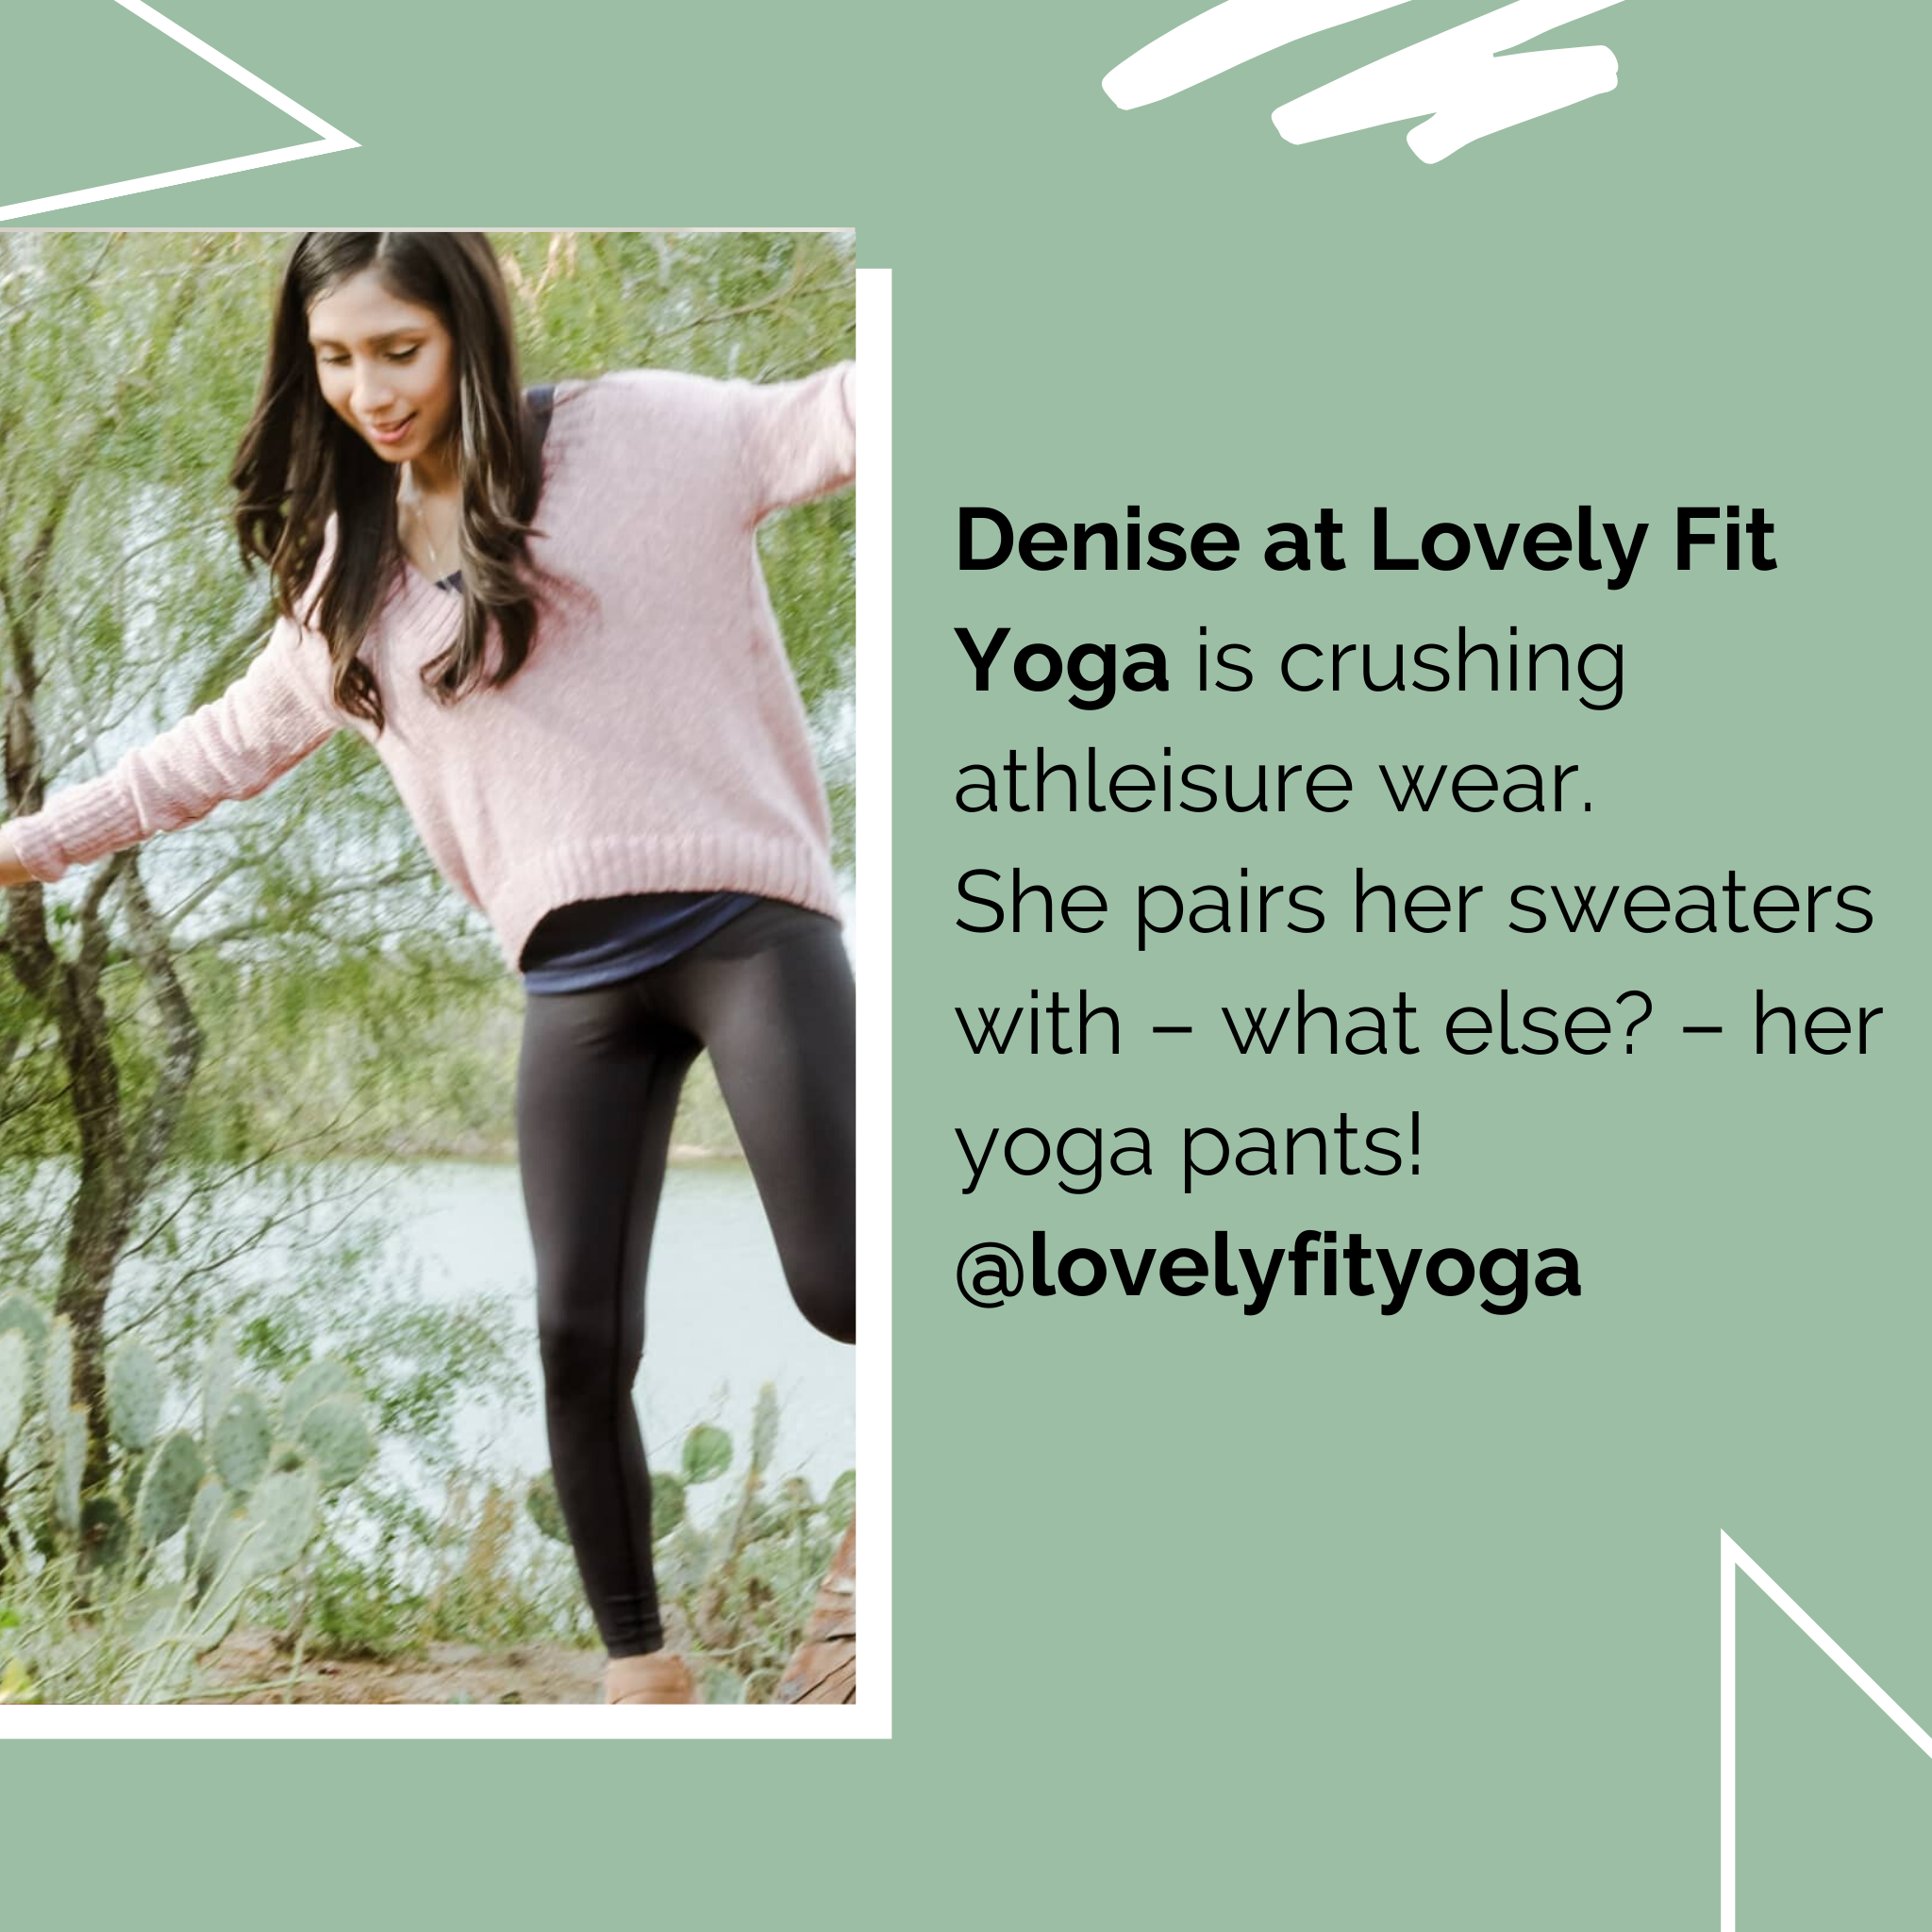 Denise at Lovely Fit Yoga Petite is crushing athleisure wear. She pairs her sweaters with – what else? – her yoga pants!